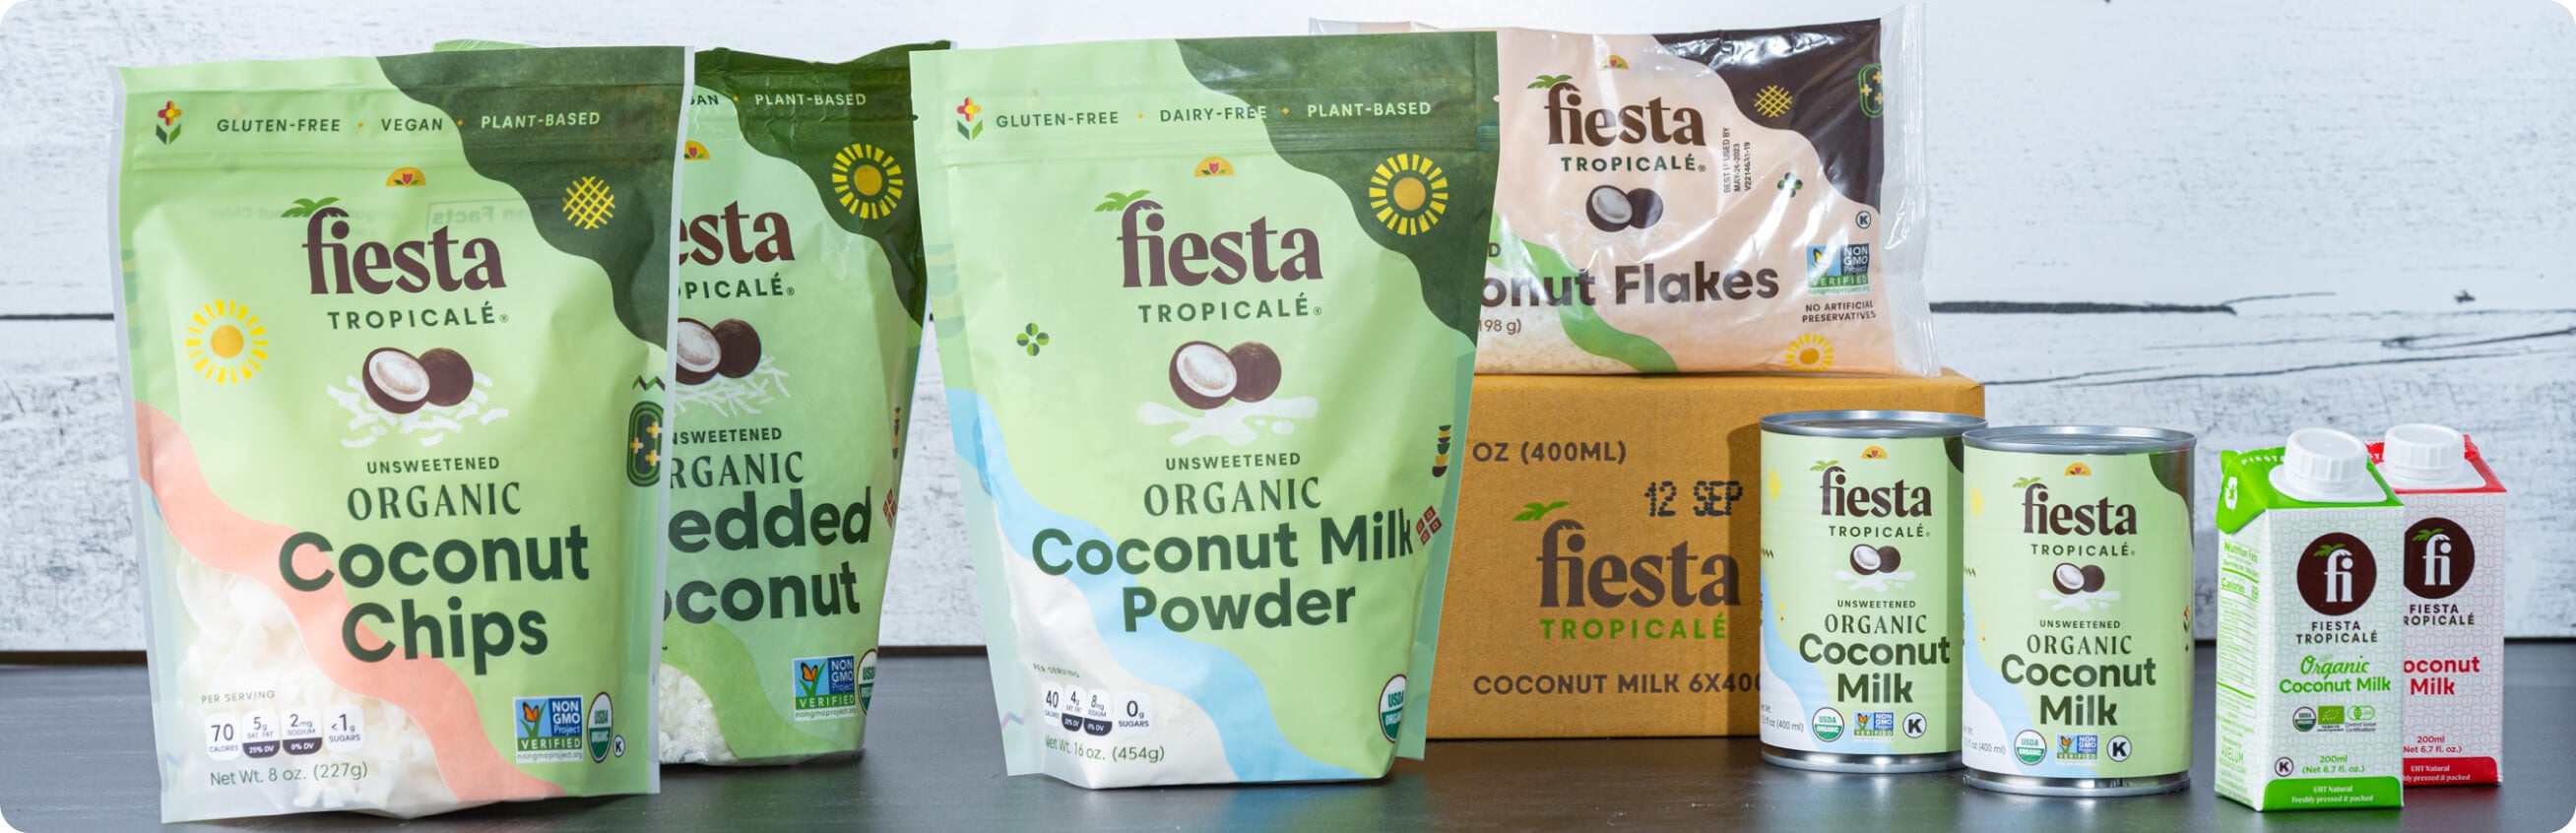 Fresh and Organic Fiesta Tropicale Products in the USA